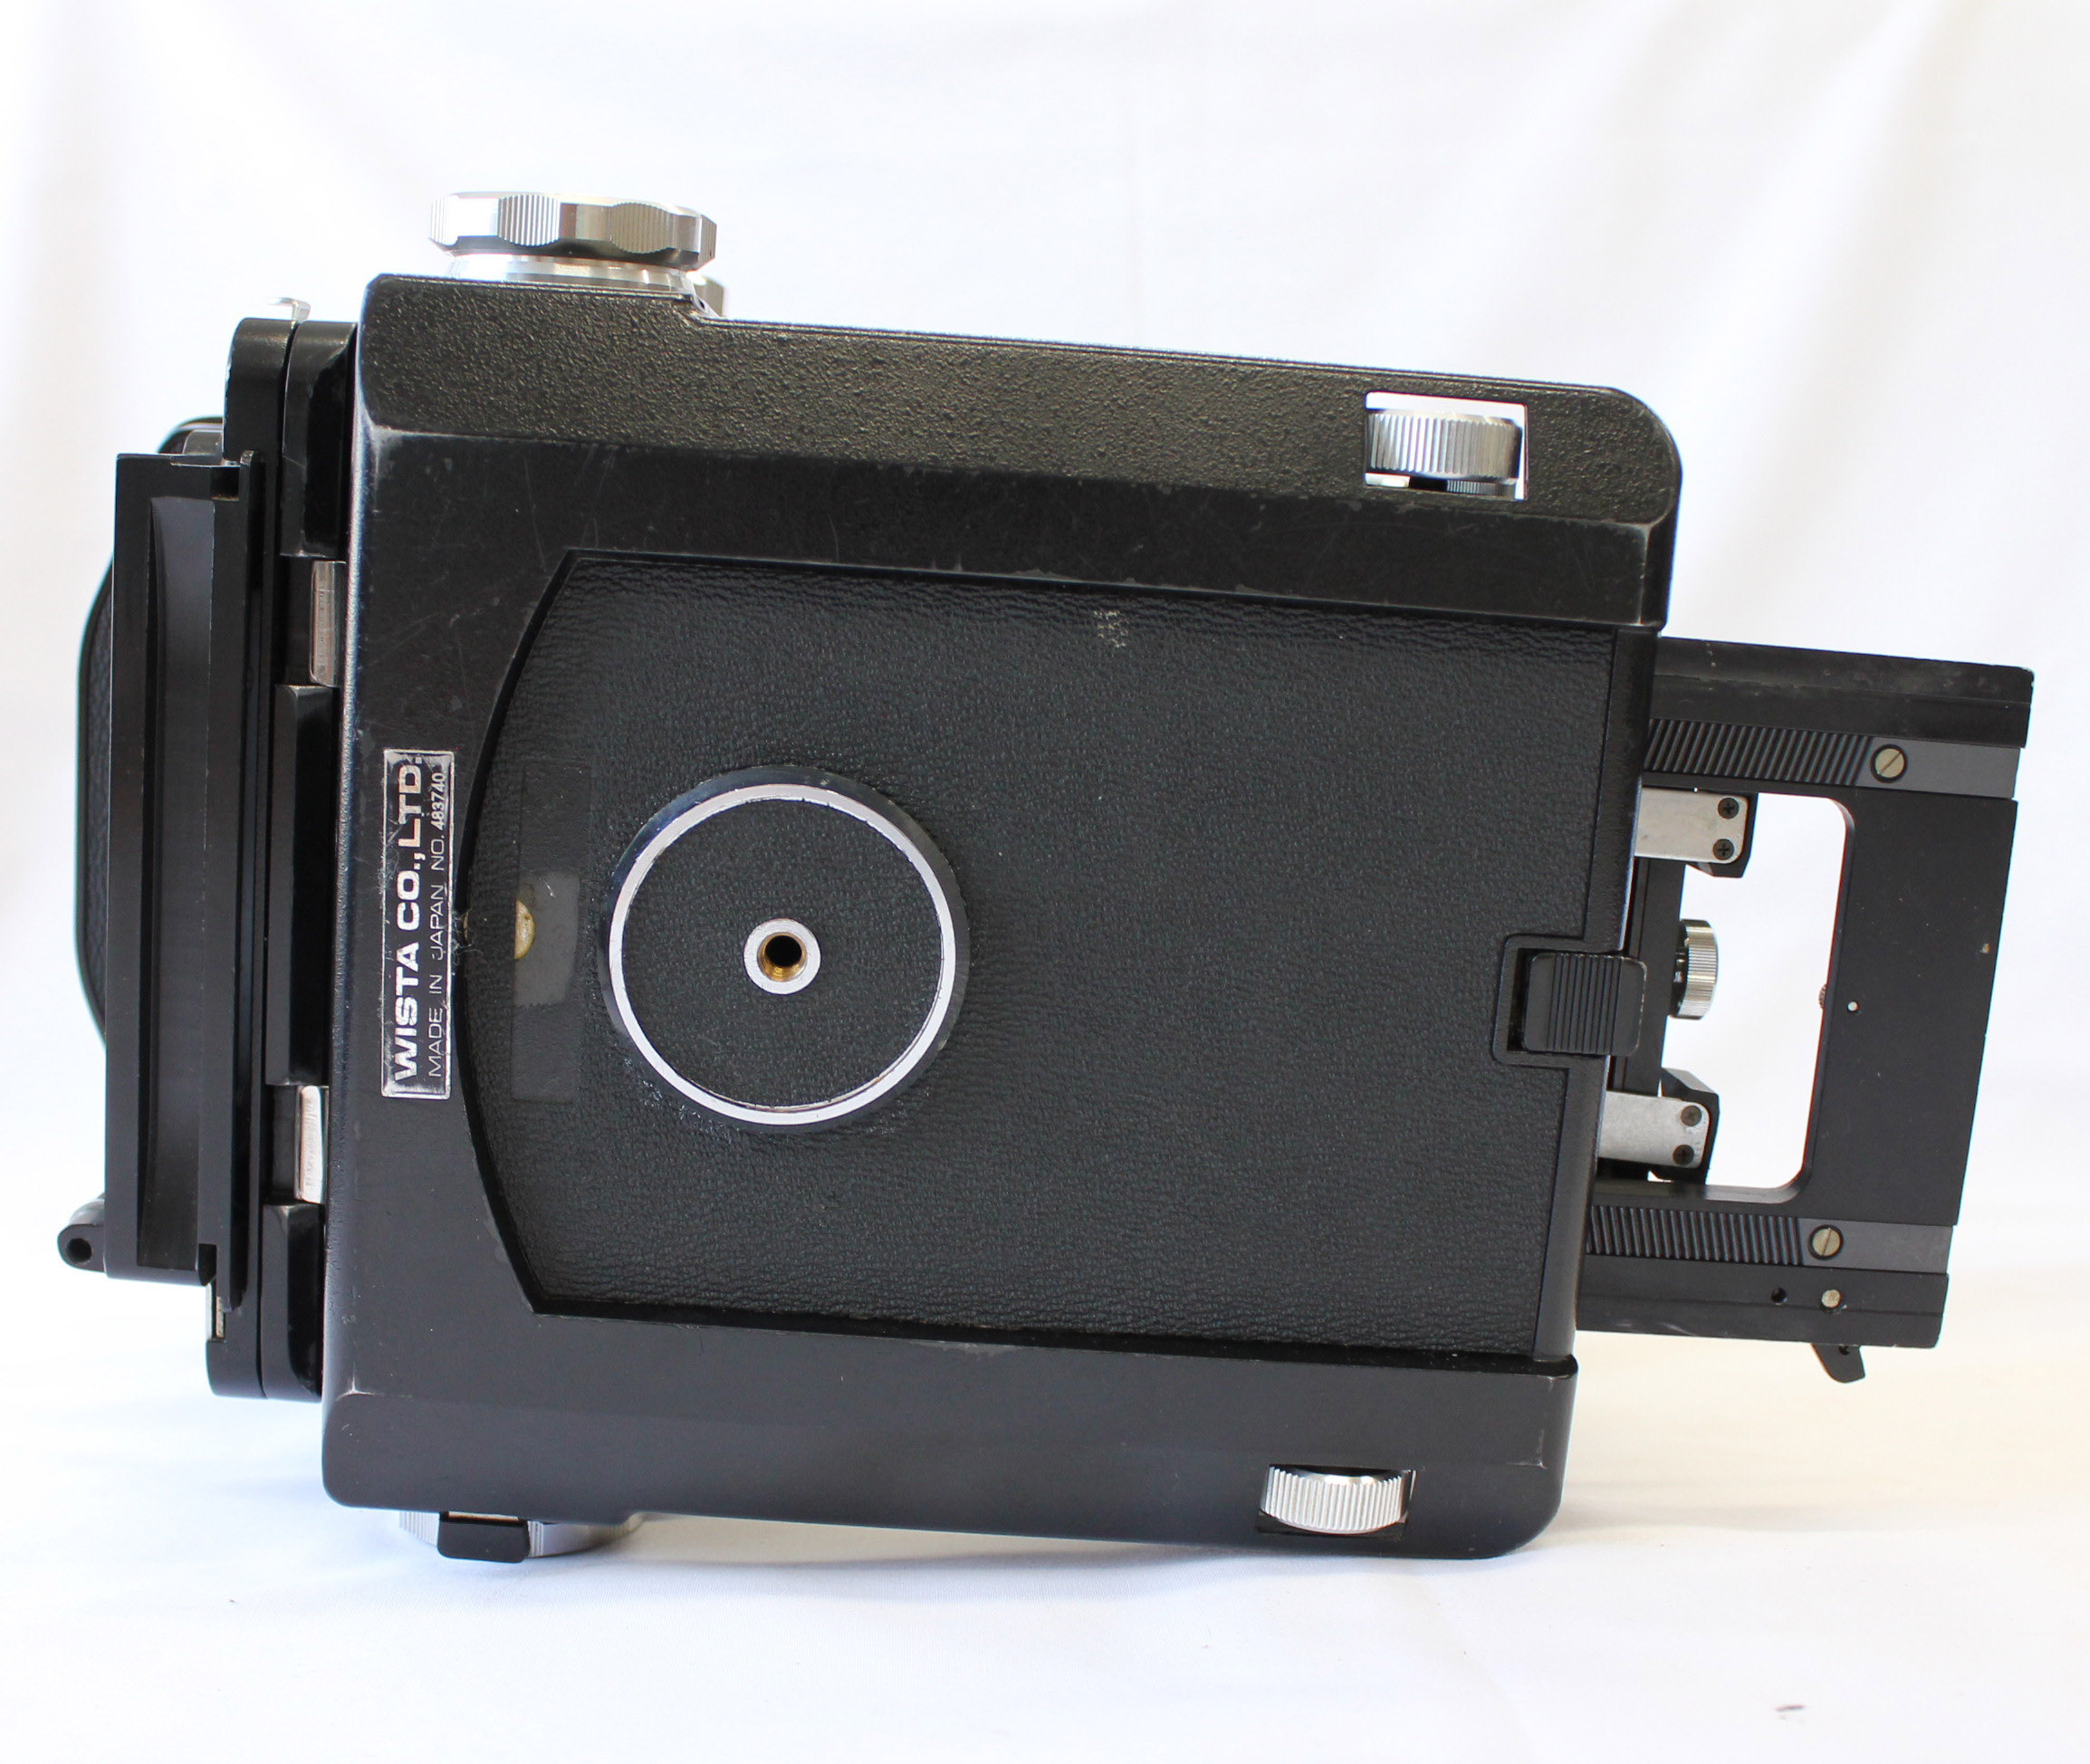  Wista 45 45D 4x5 Large Format Camera w/ 6x9 Roll FIlm Holder & Quick Roll Slider from Japan Photo 4